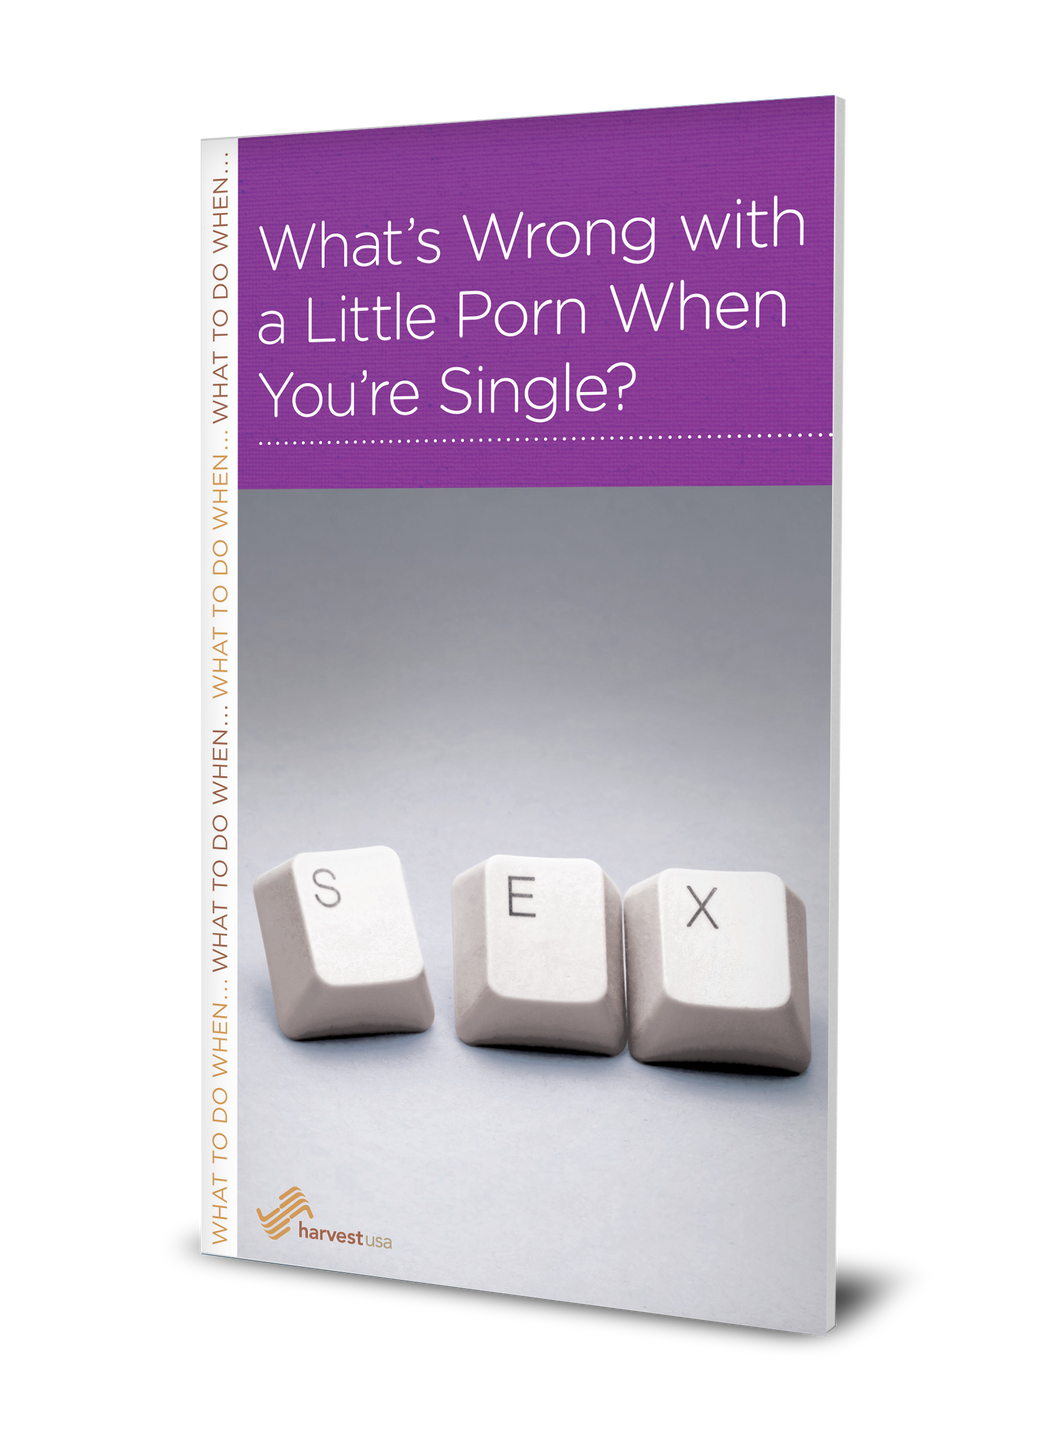 What's Wrong with a Little Porn When You're Single? (Minibook)